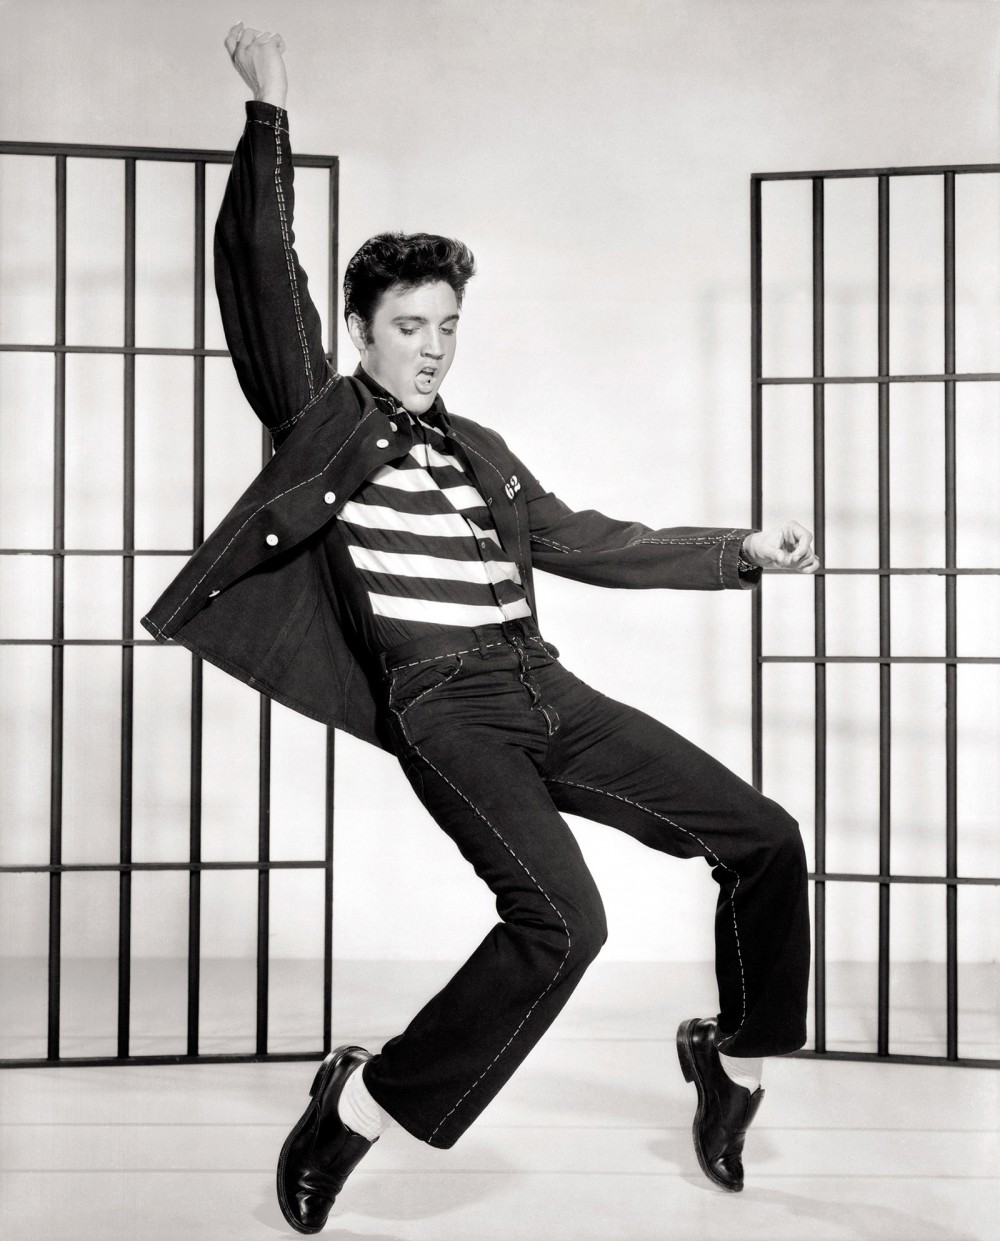 This photograph of Elvis depicts the rock star dancing. 